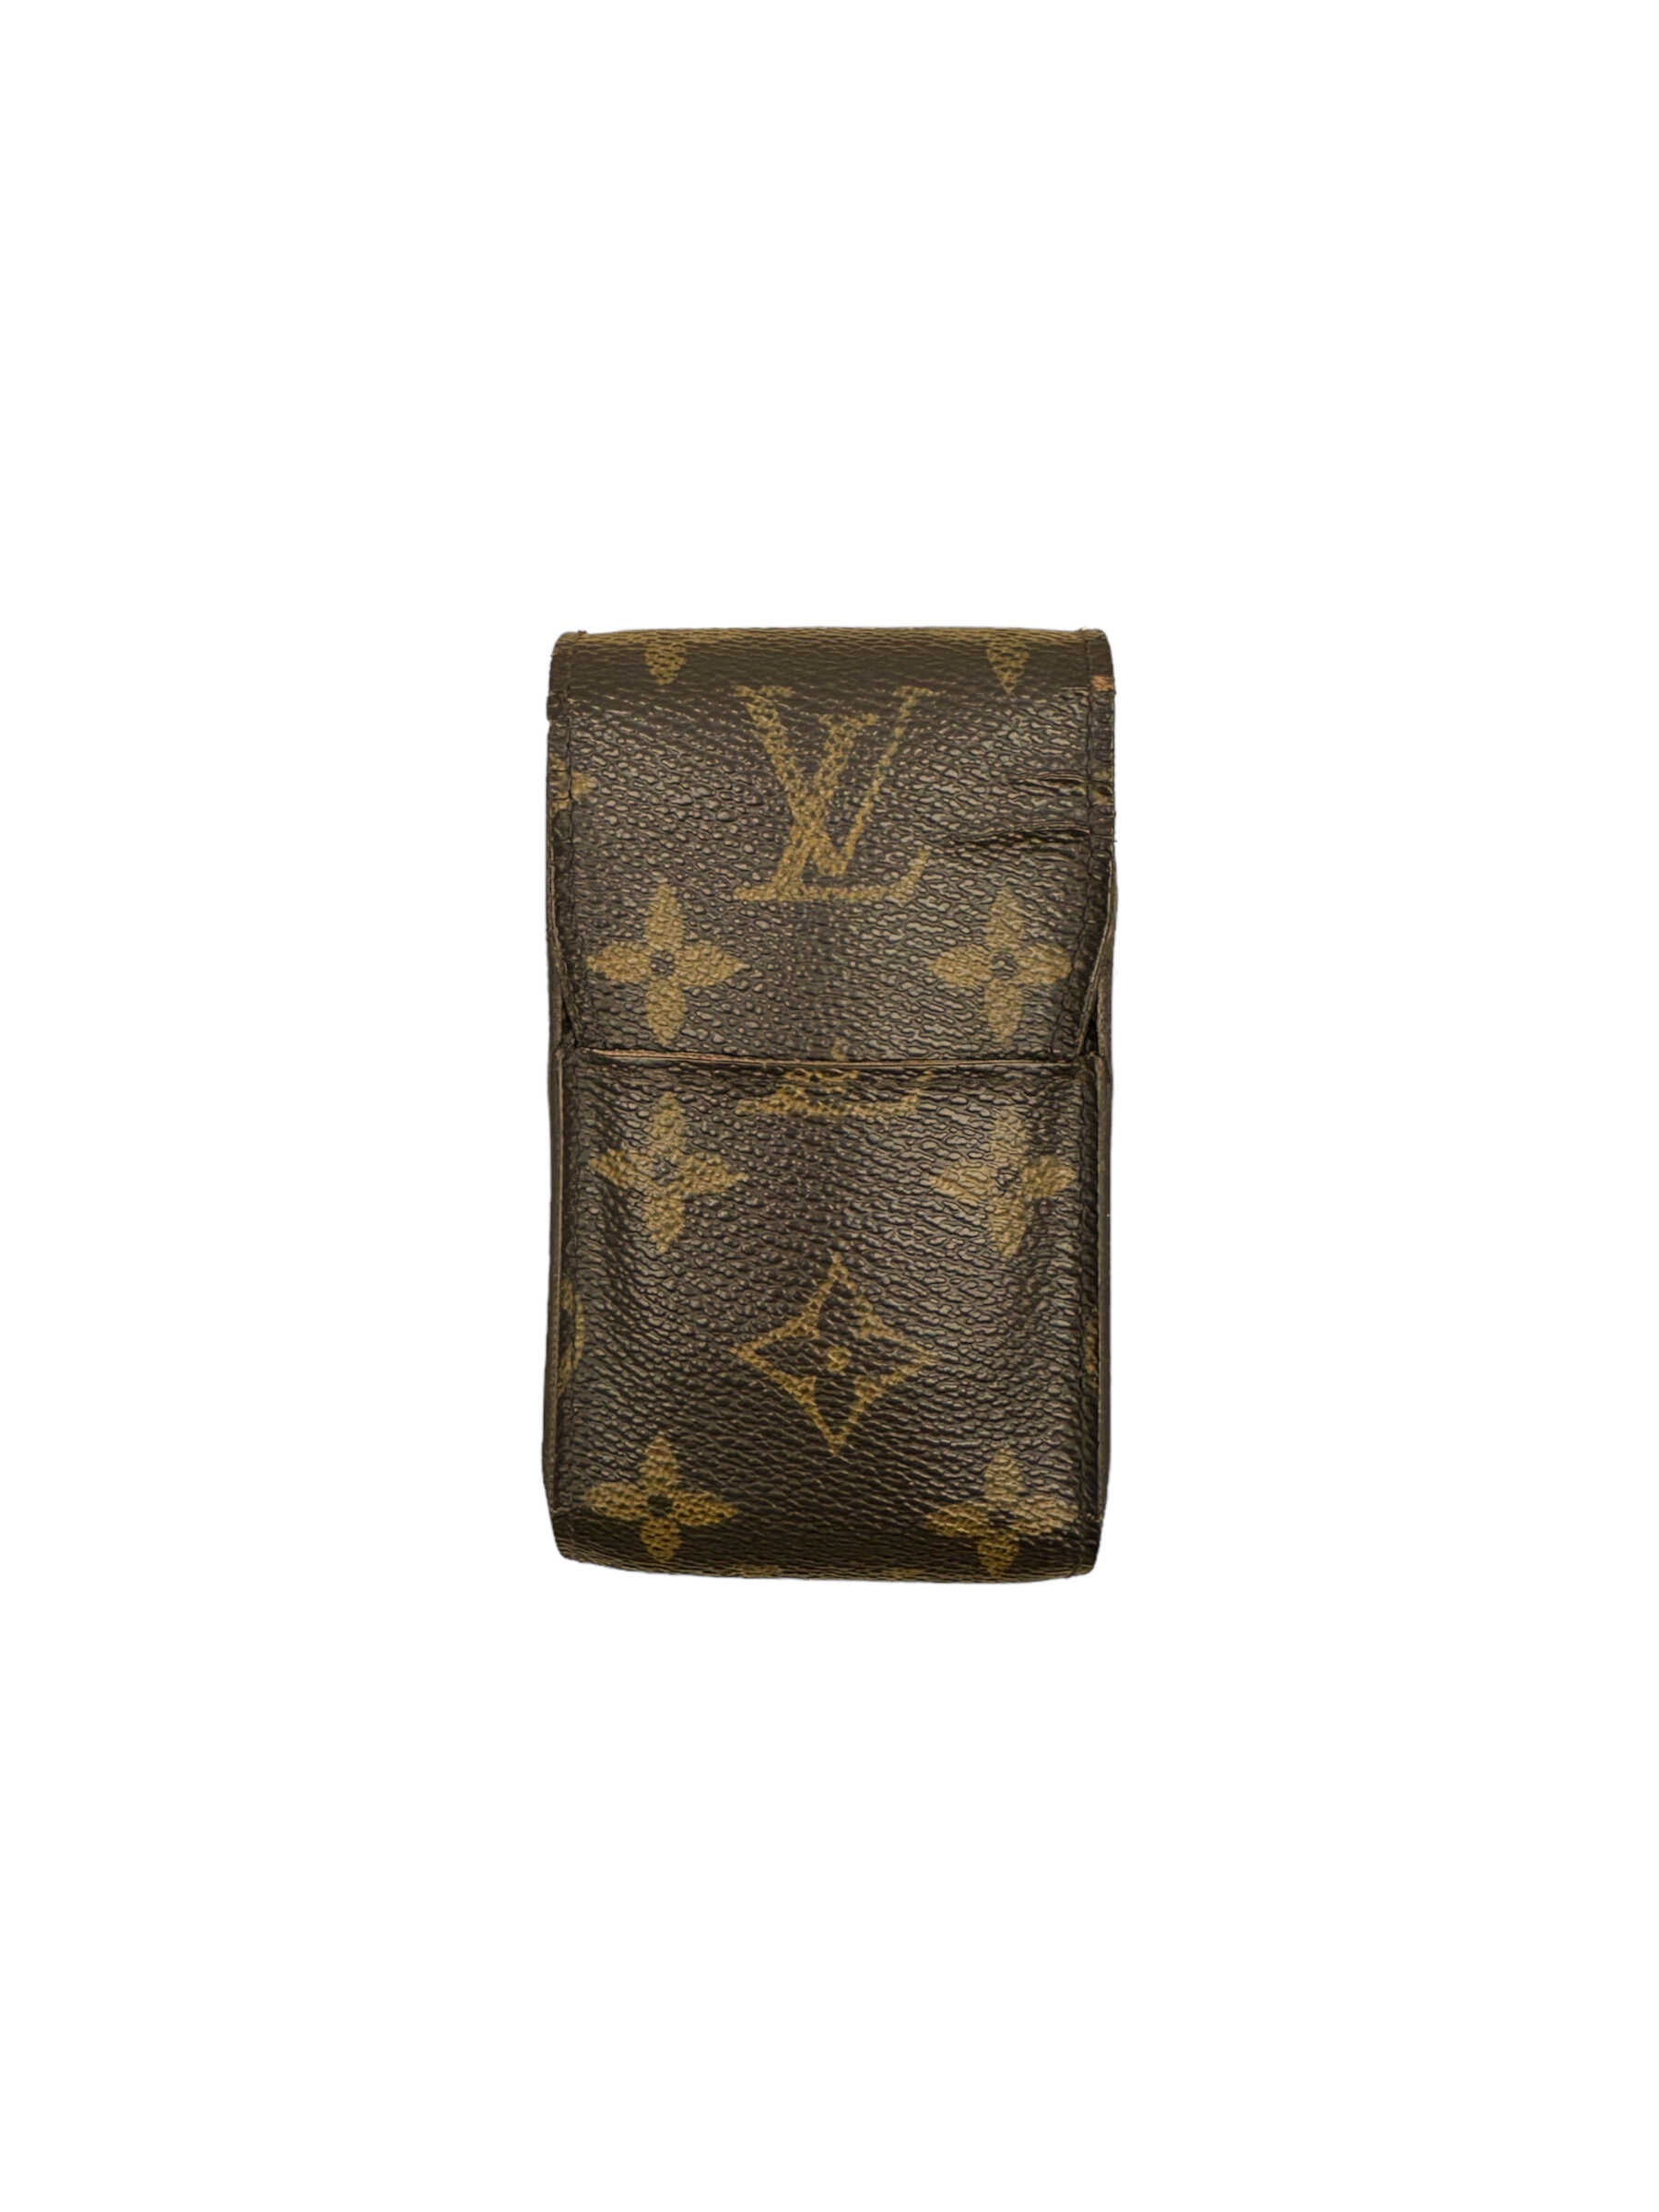 Wallet Luxury Designer By Louis Vuitton Size: Small